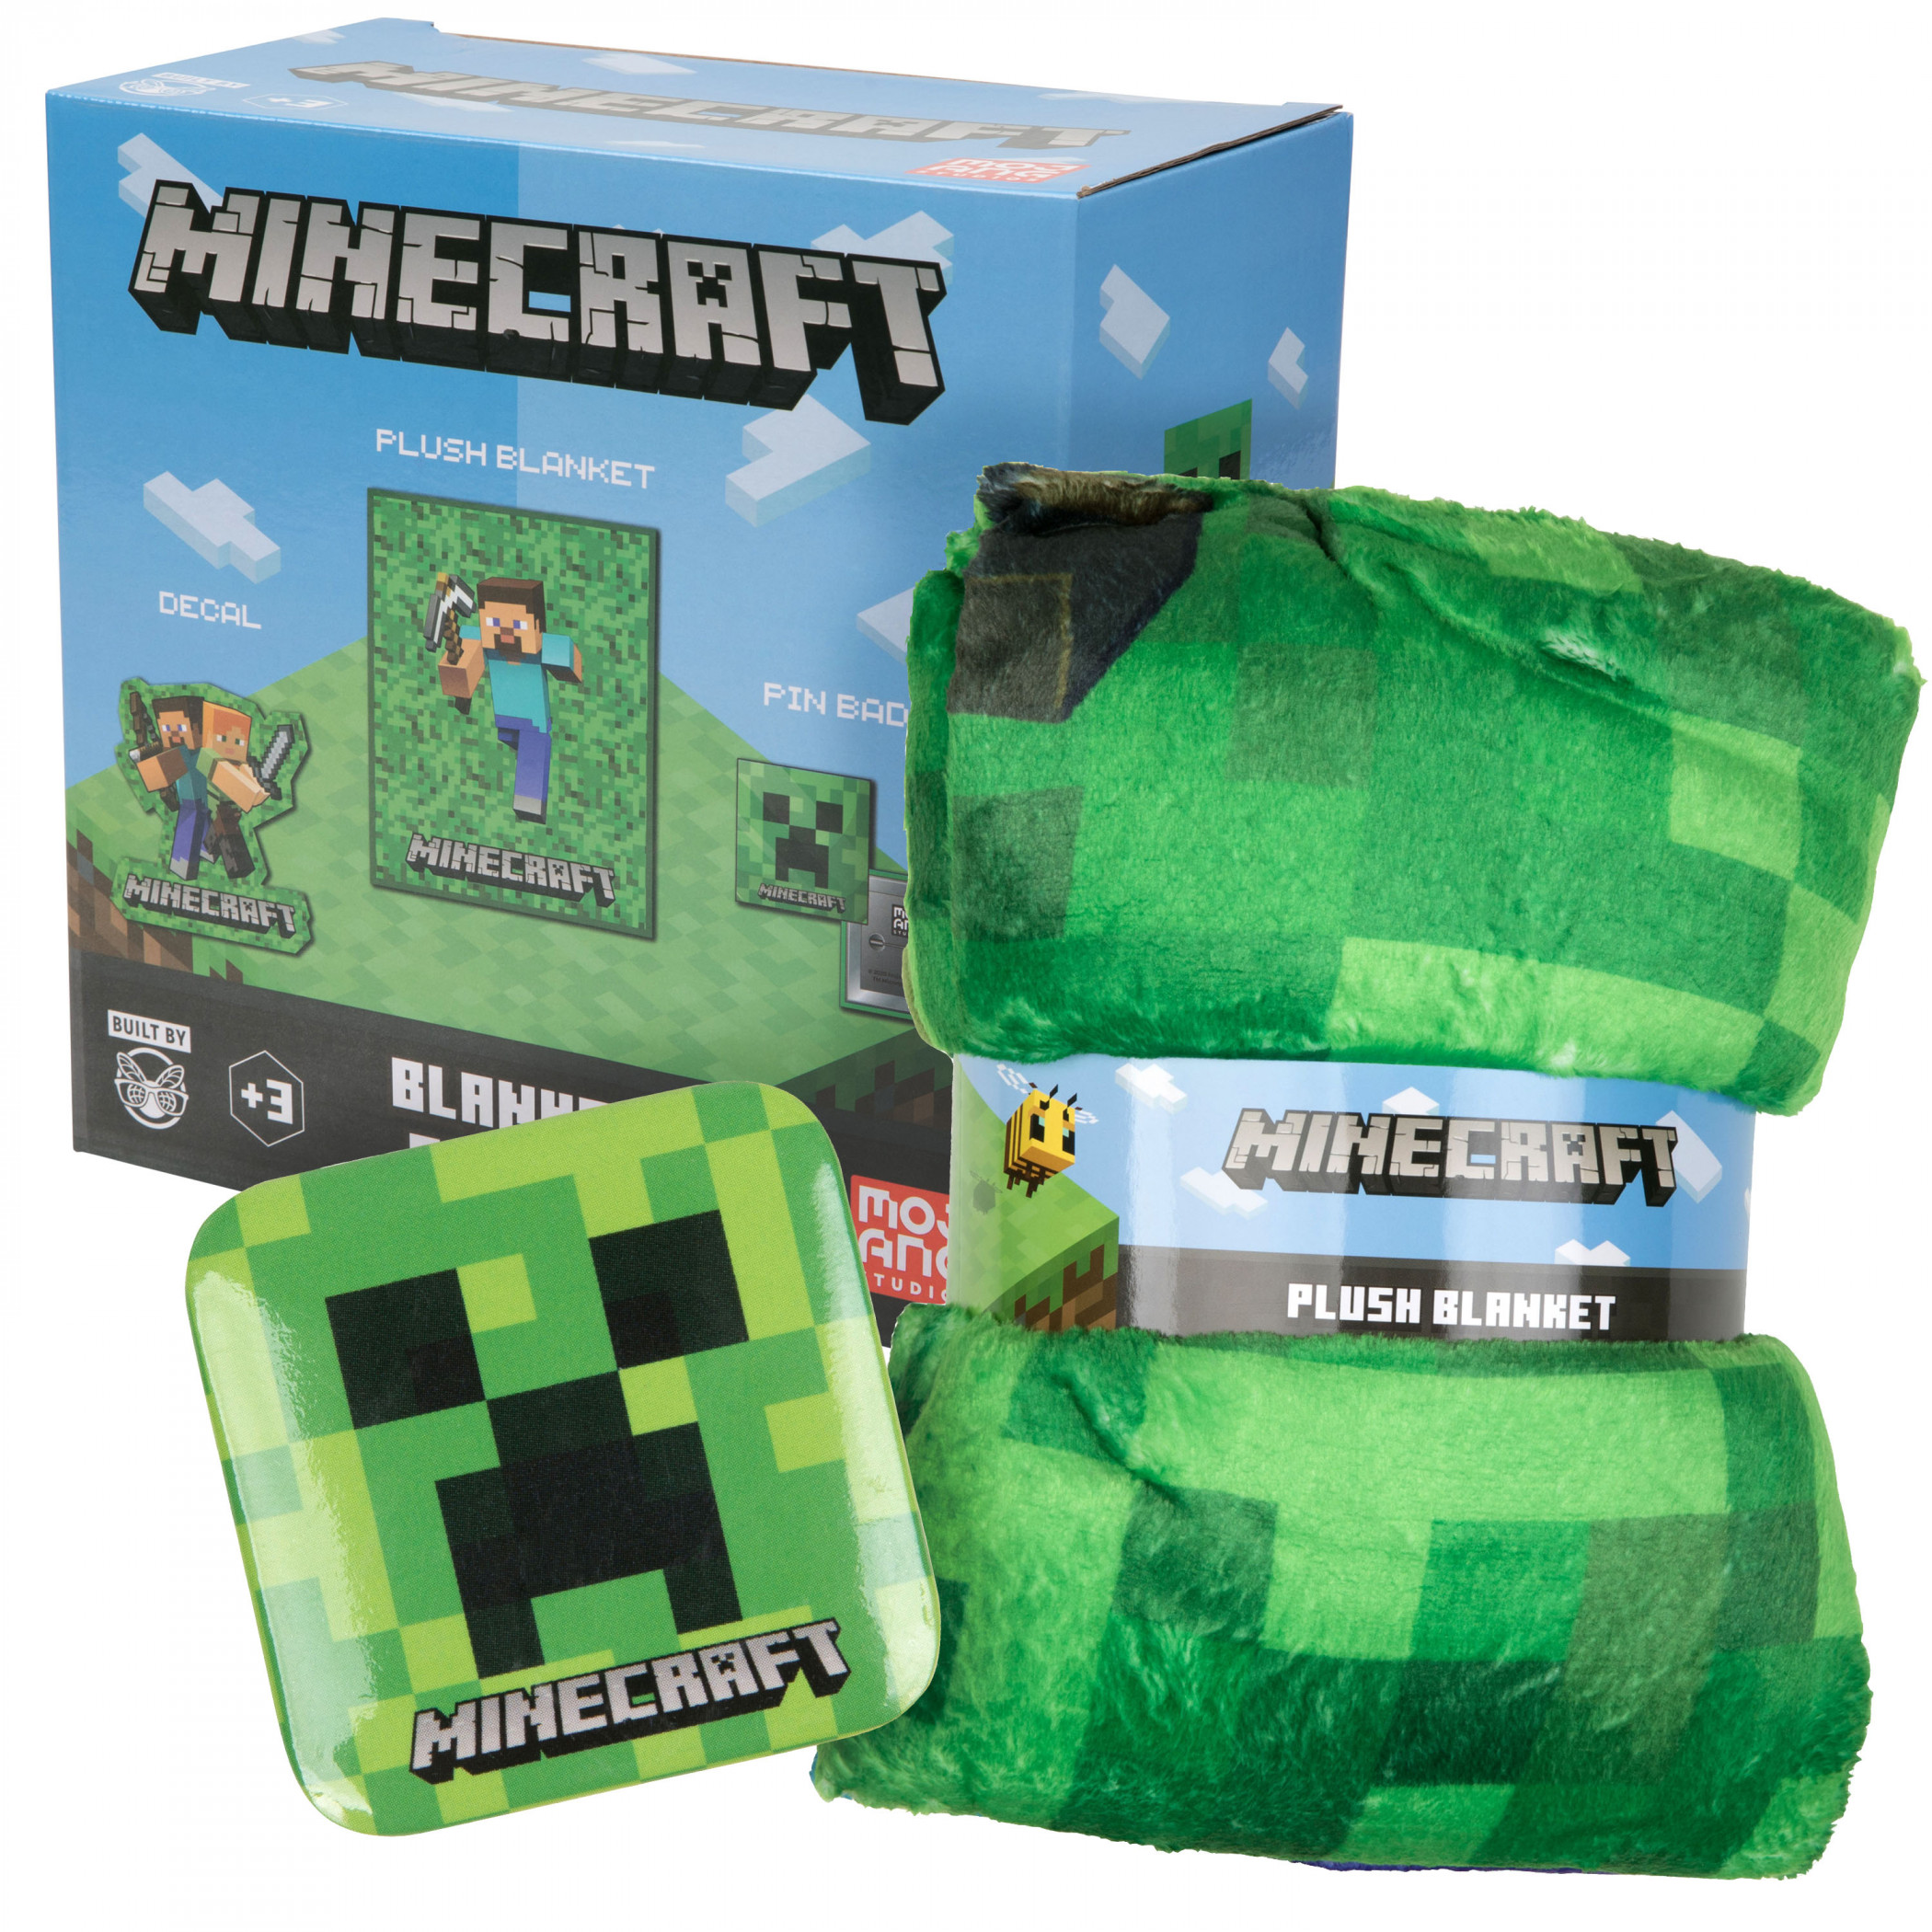 Minecraft Steve Throw Blanket with Lanyard and Pin Box Set